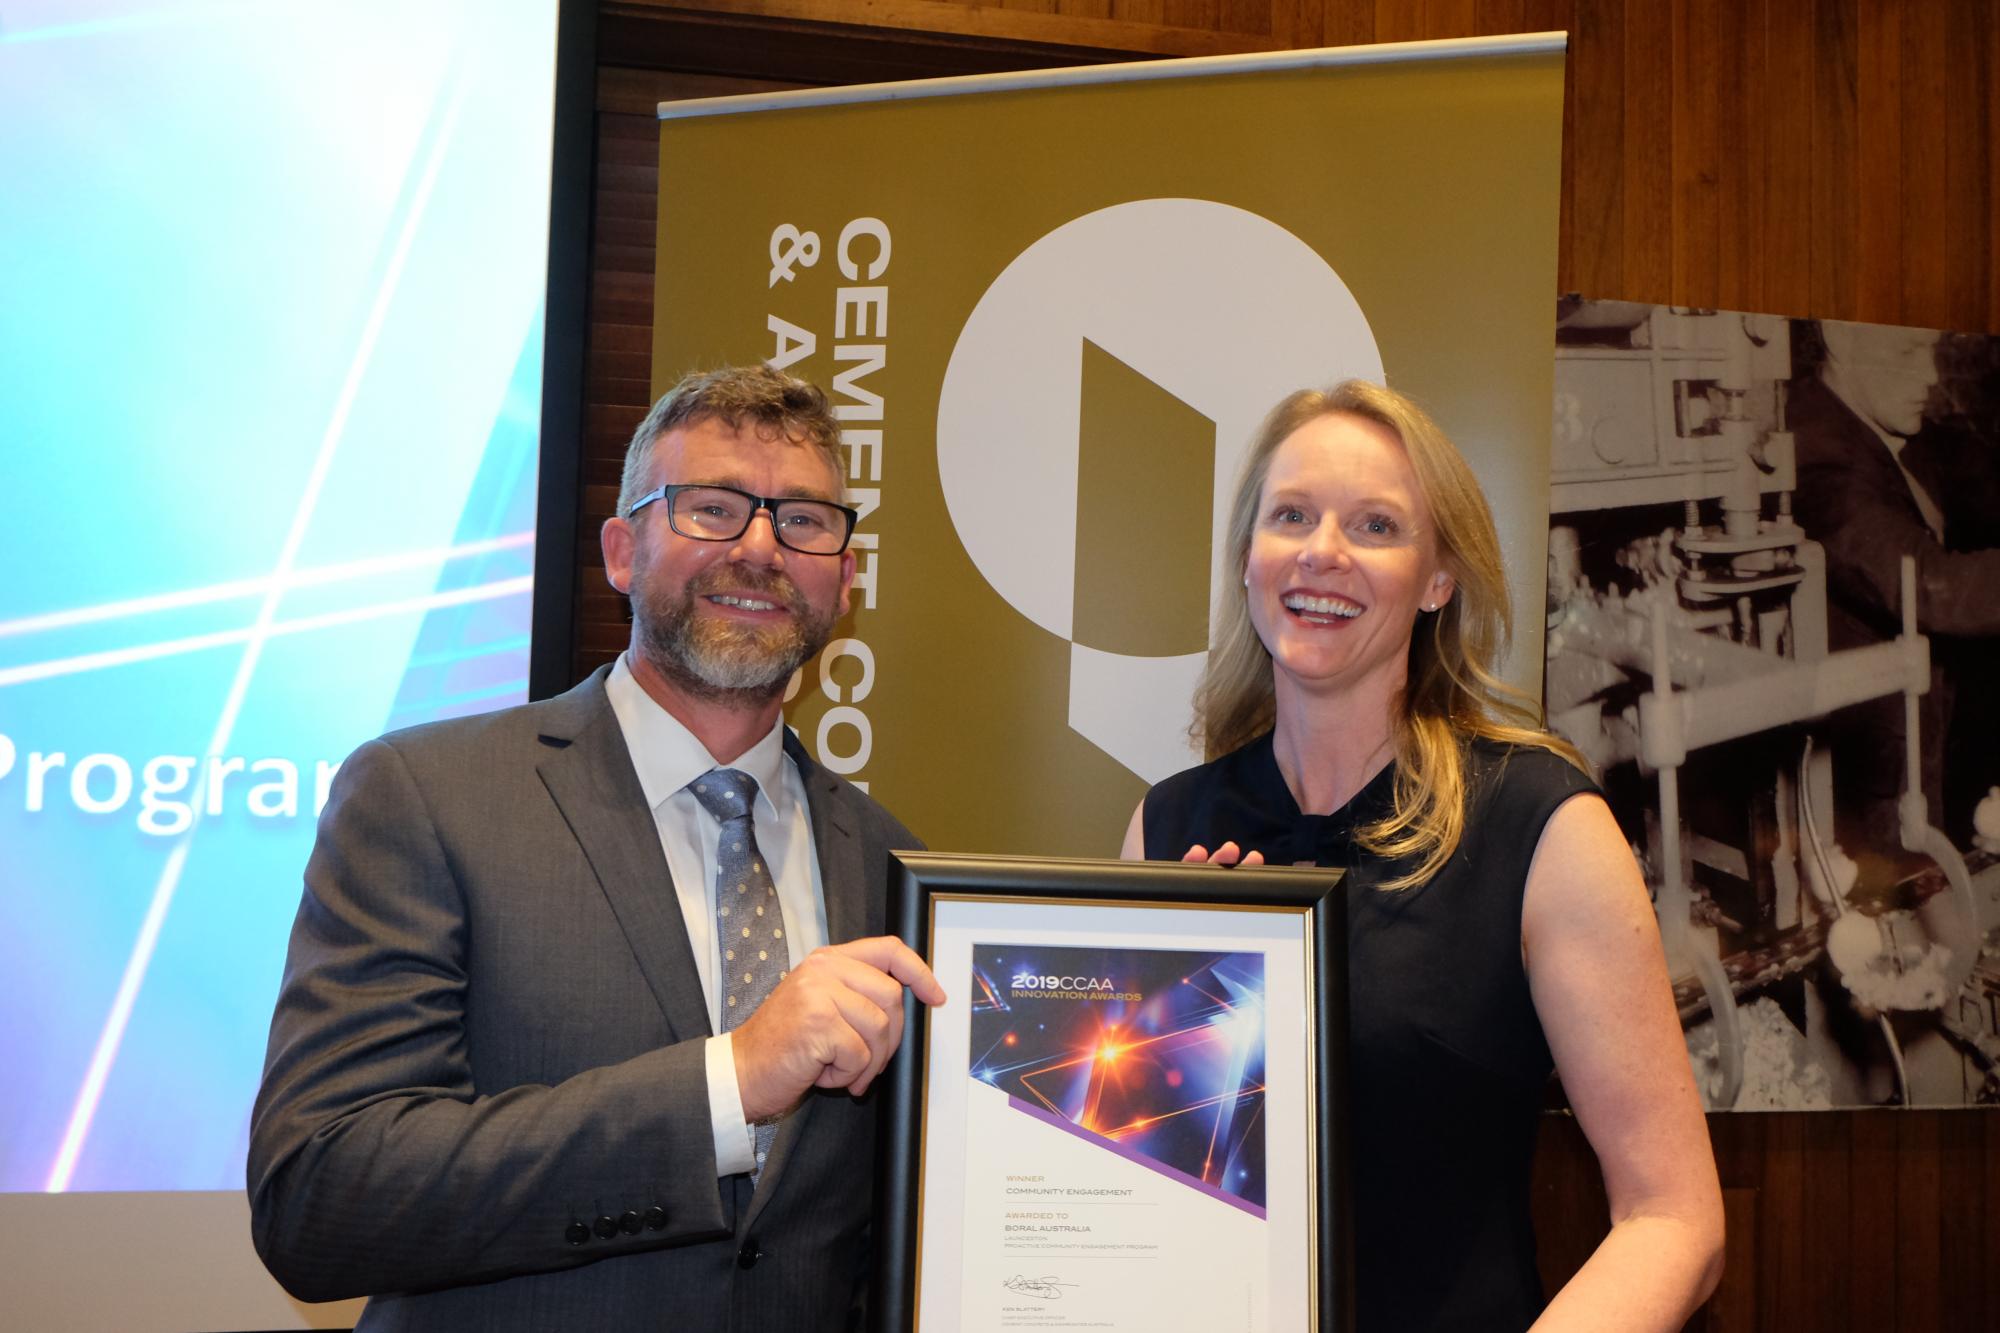 Pictured: Tasmanian Minister for Resources, Building and Construction, Sarah Courtney, presenting Boral Tasmania General Manager Gary Chapman with the award in Hobart on May 24, 2019